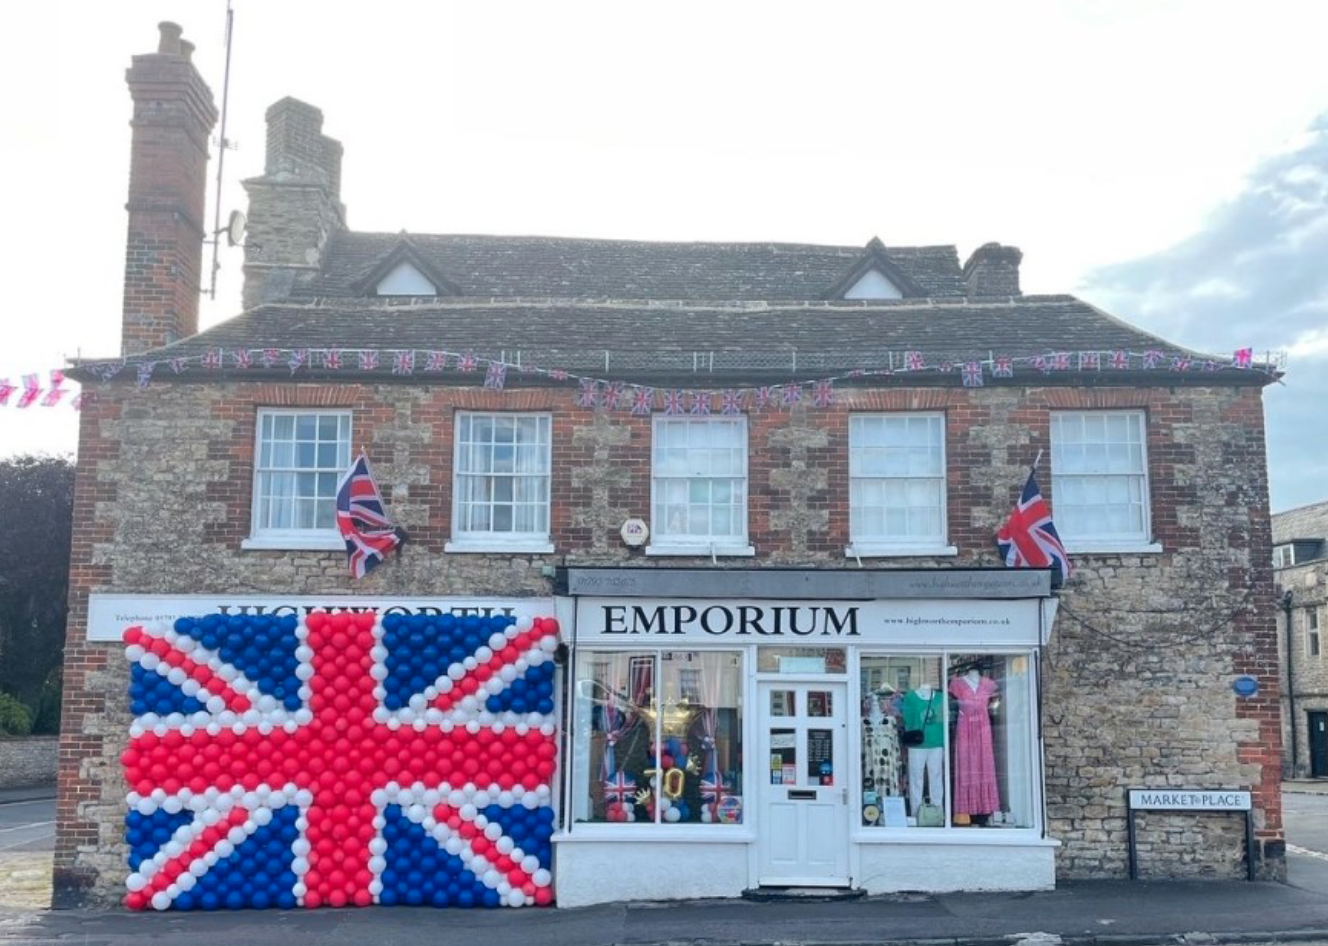  You couldn’t miss Highworth Emporium’s Jubilee balloon installation